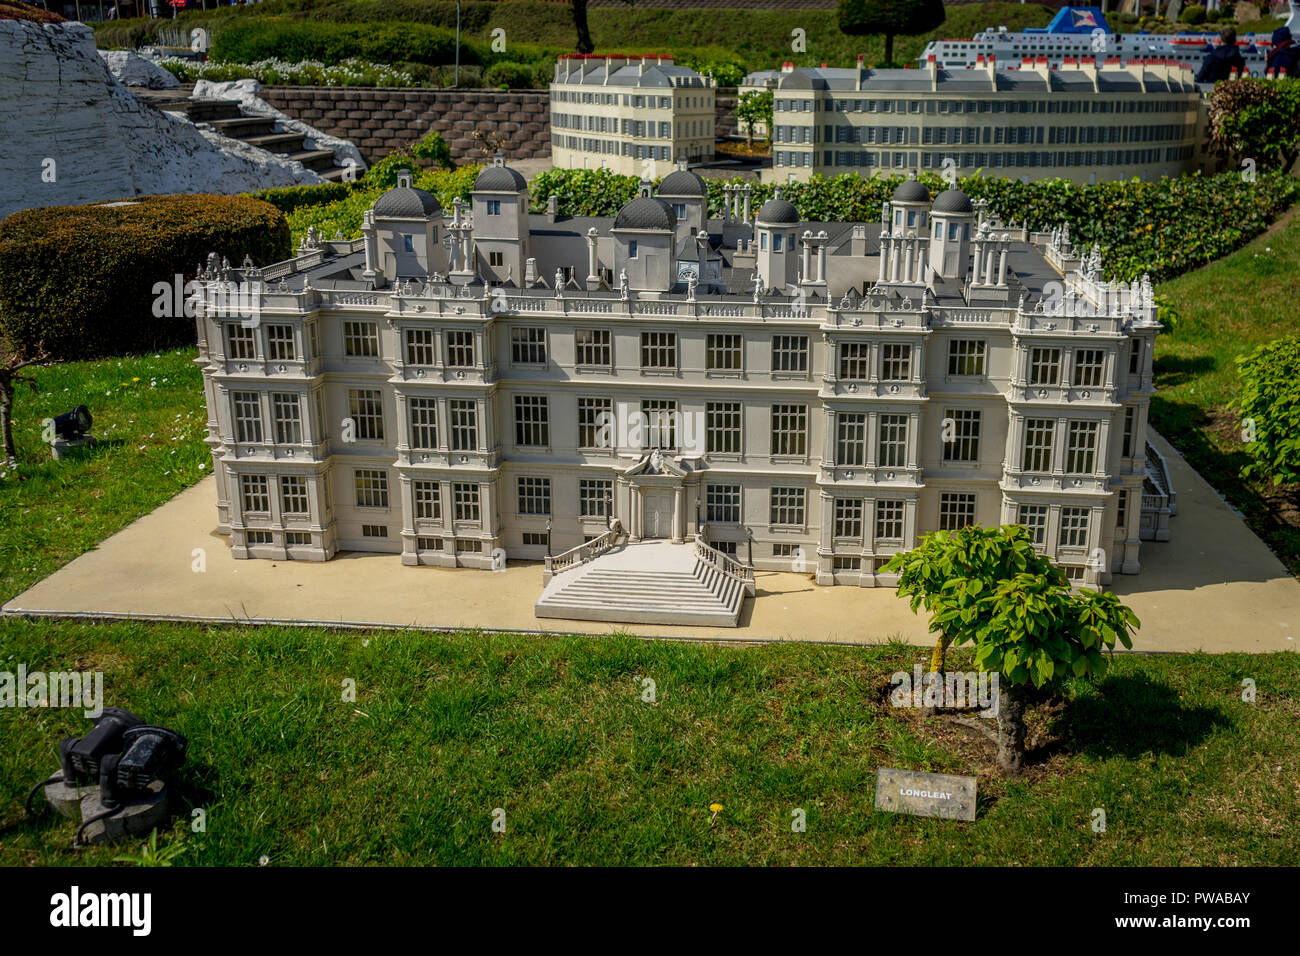 BRUSSELS, BELGIUM - 17 April 2017: Miniatures at the park Mini-Europe - reproduction of the the Longleat house in Longleat, UK, Europe Stock Photo